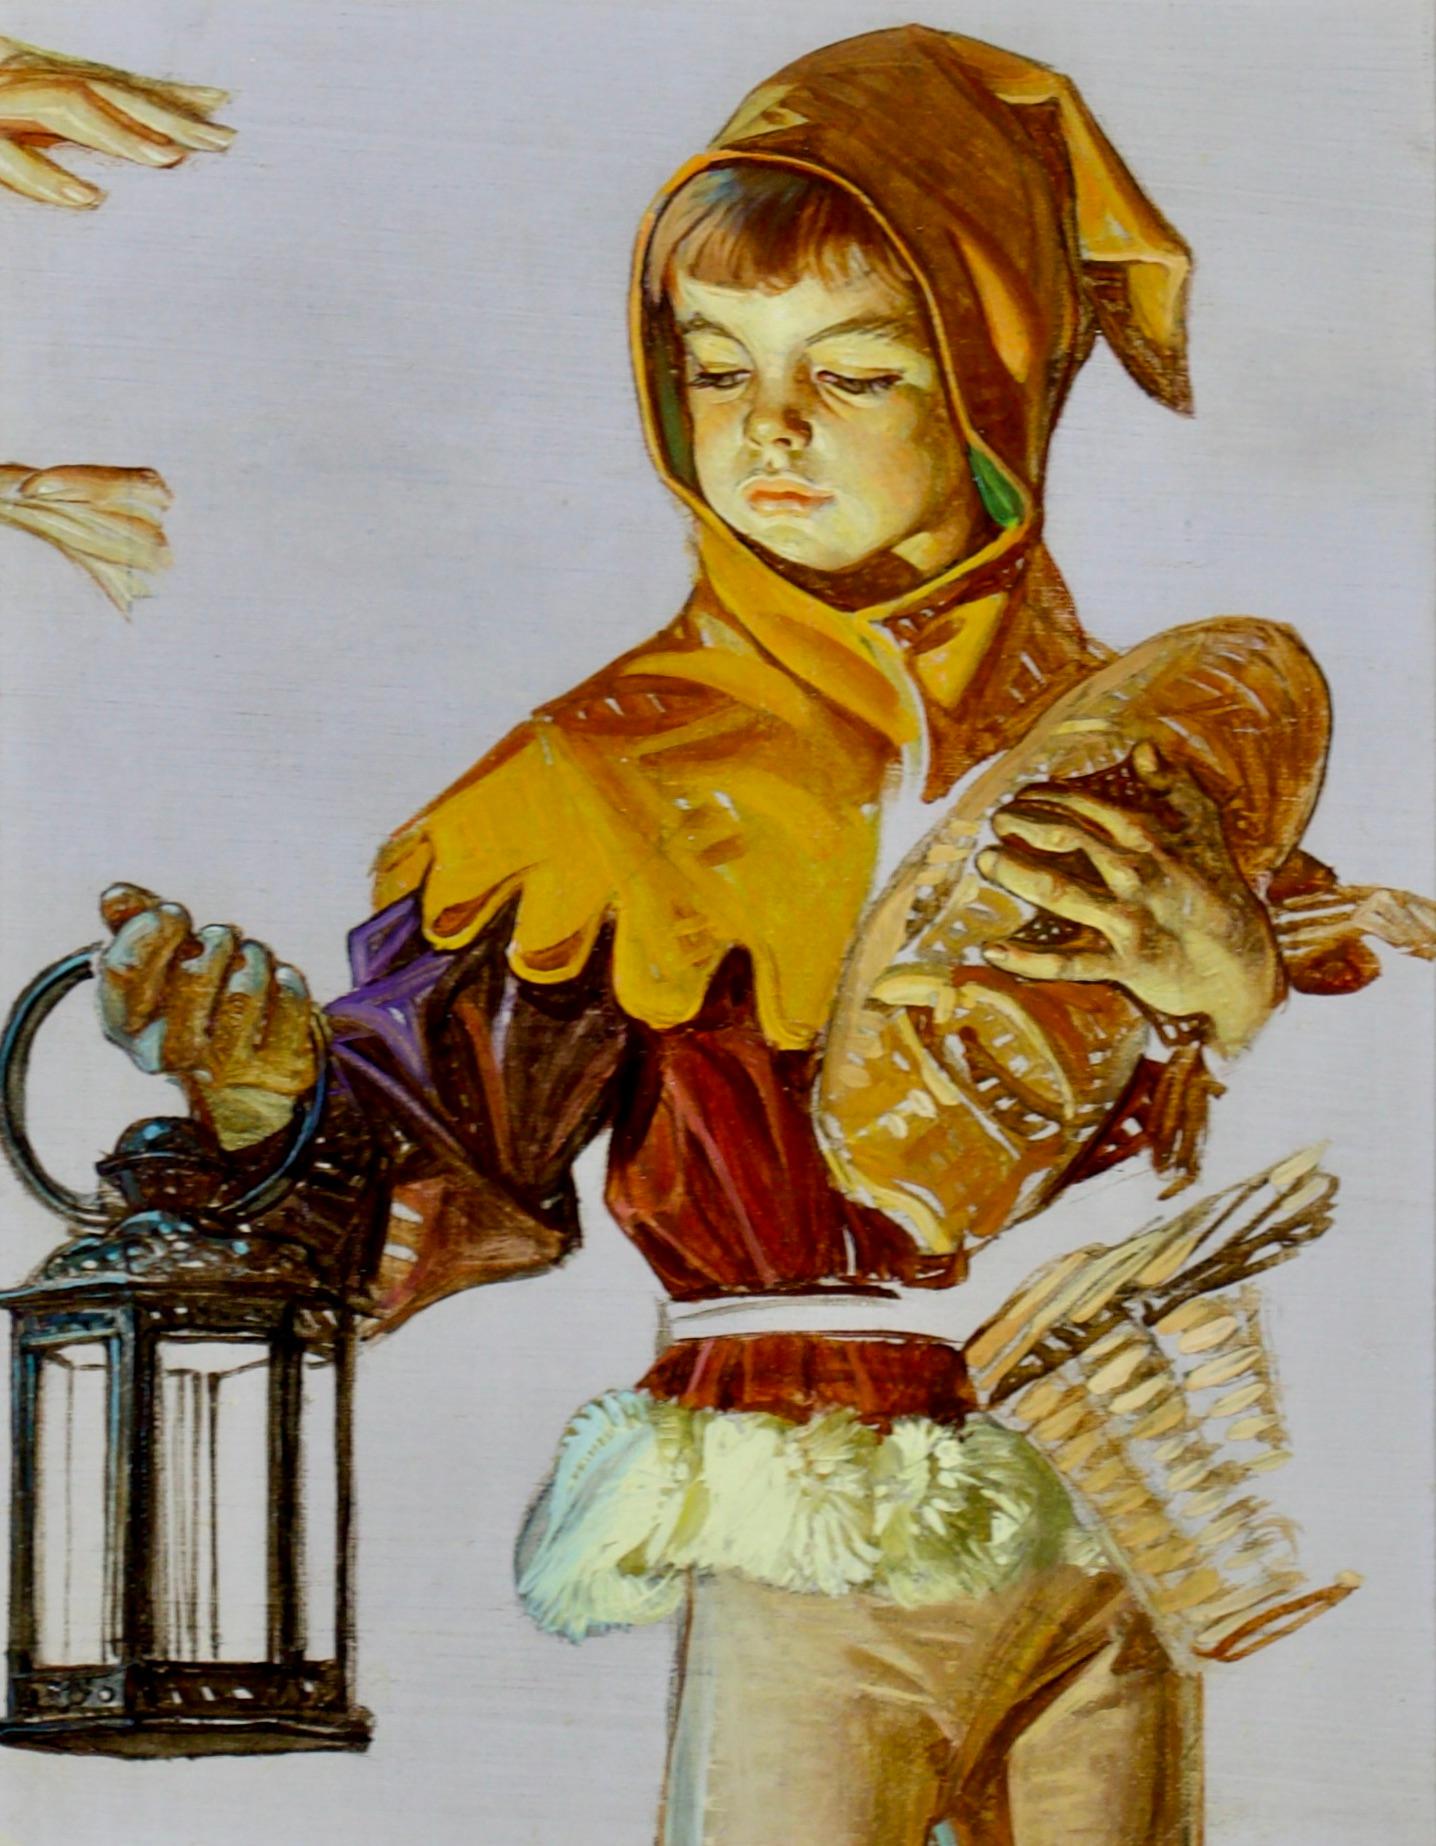 Study for Saturday Evening Post Cover 'Boy with Lantern' - Painting by Joseph Christian Leyendecker